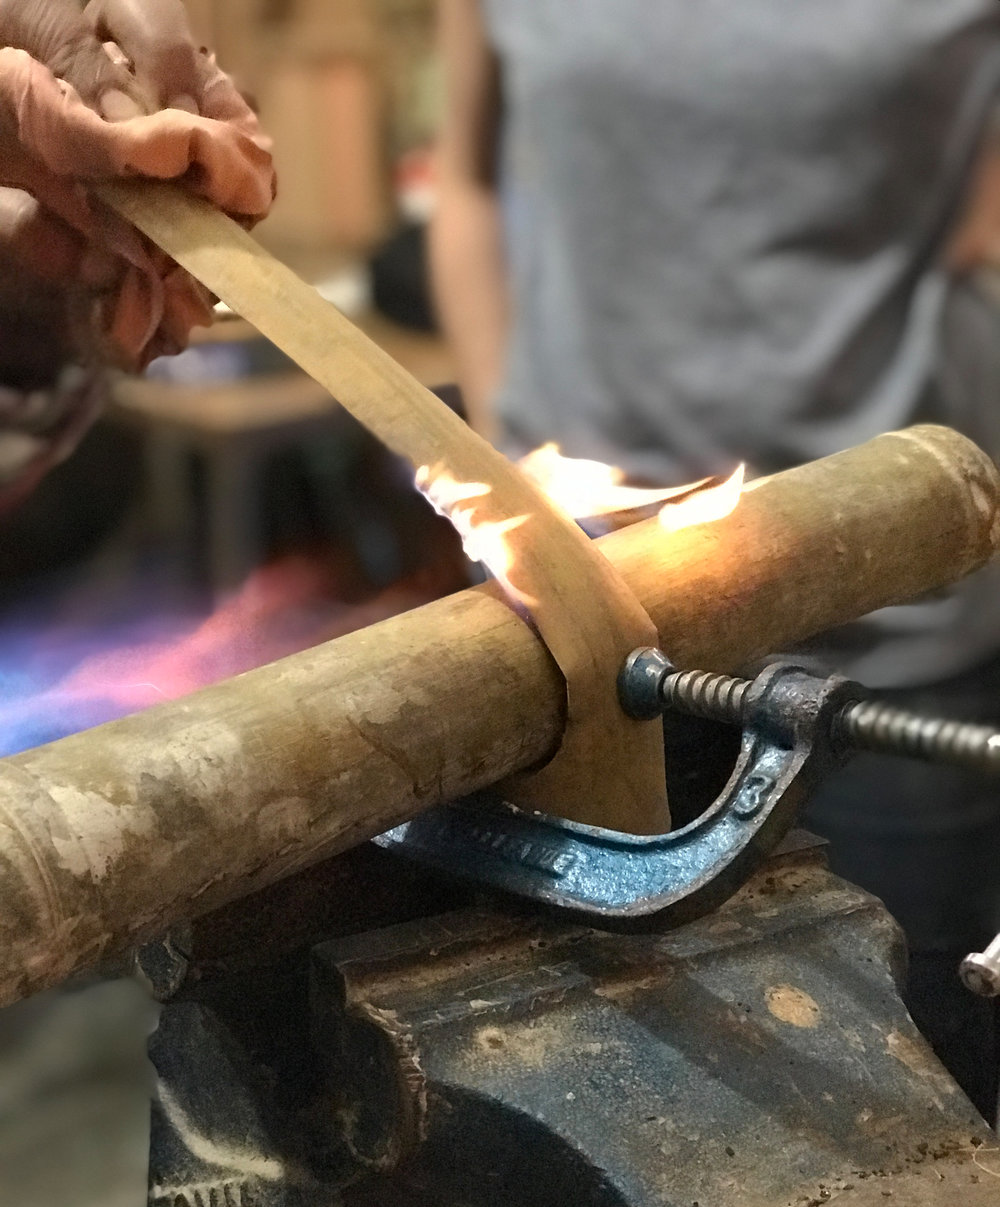 Bending bamboo with heat.